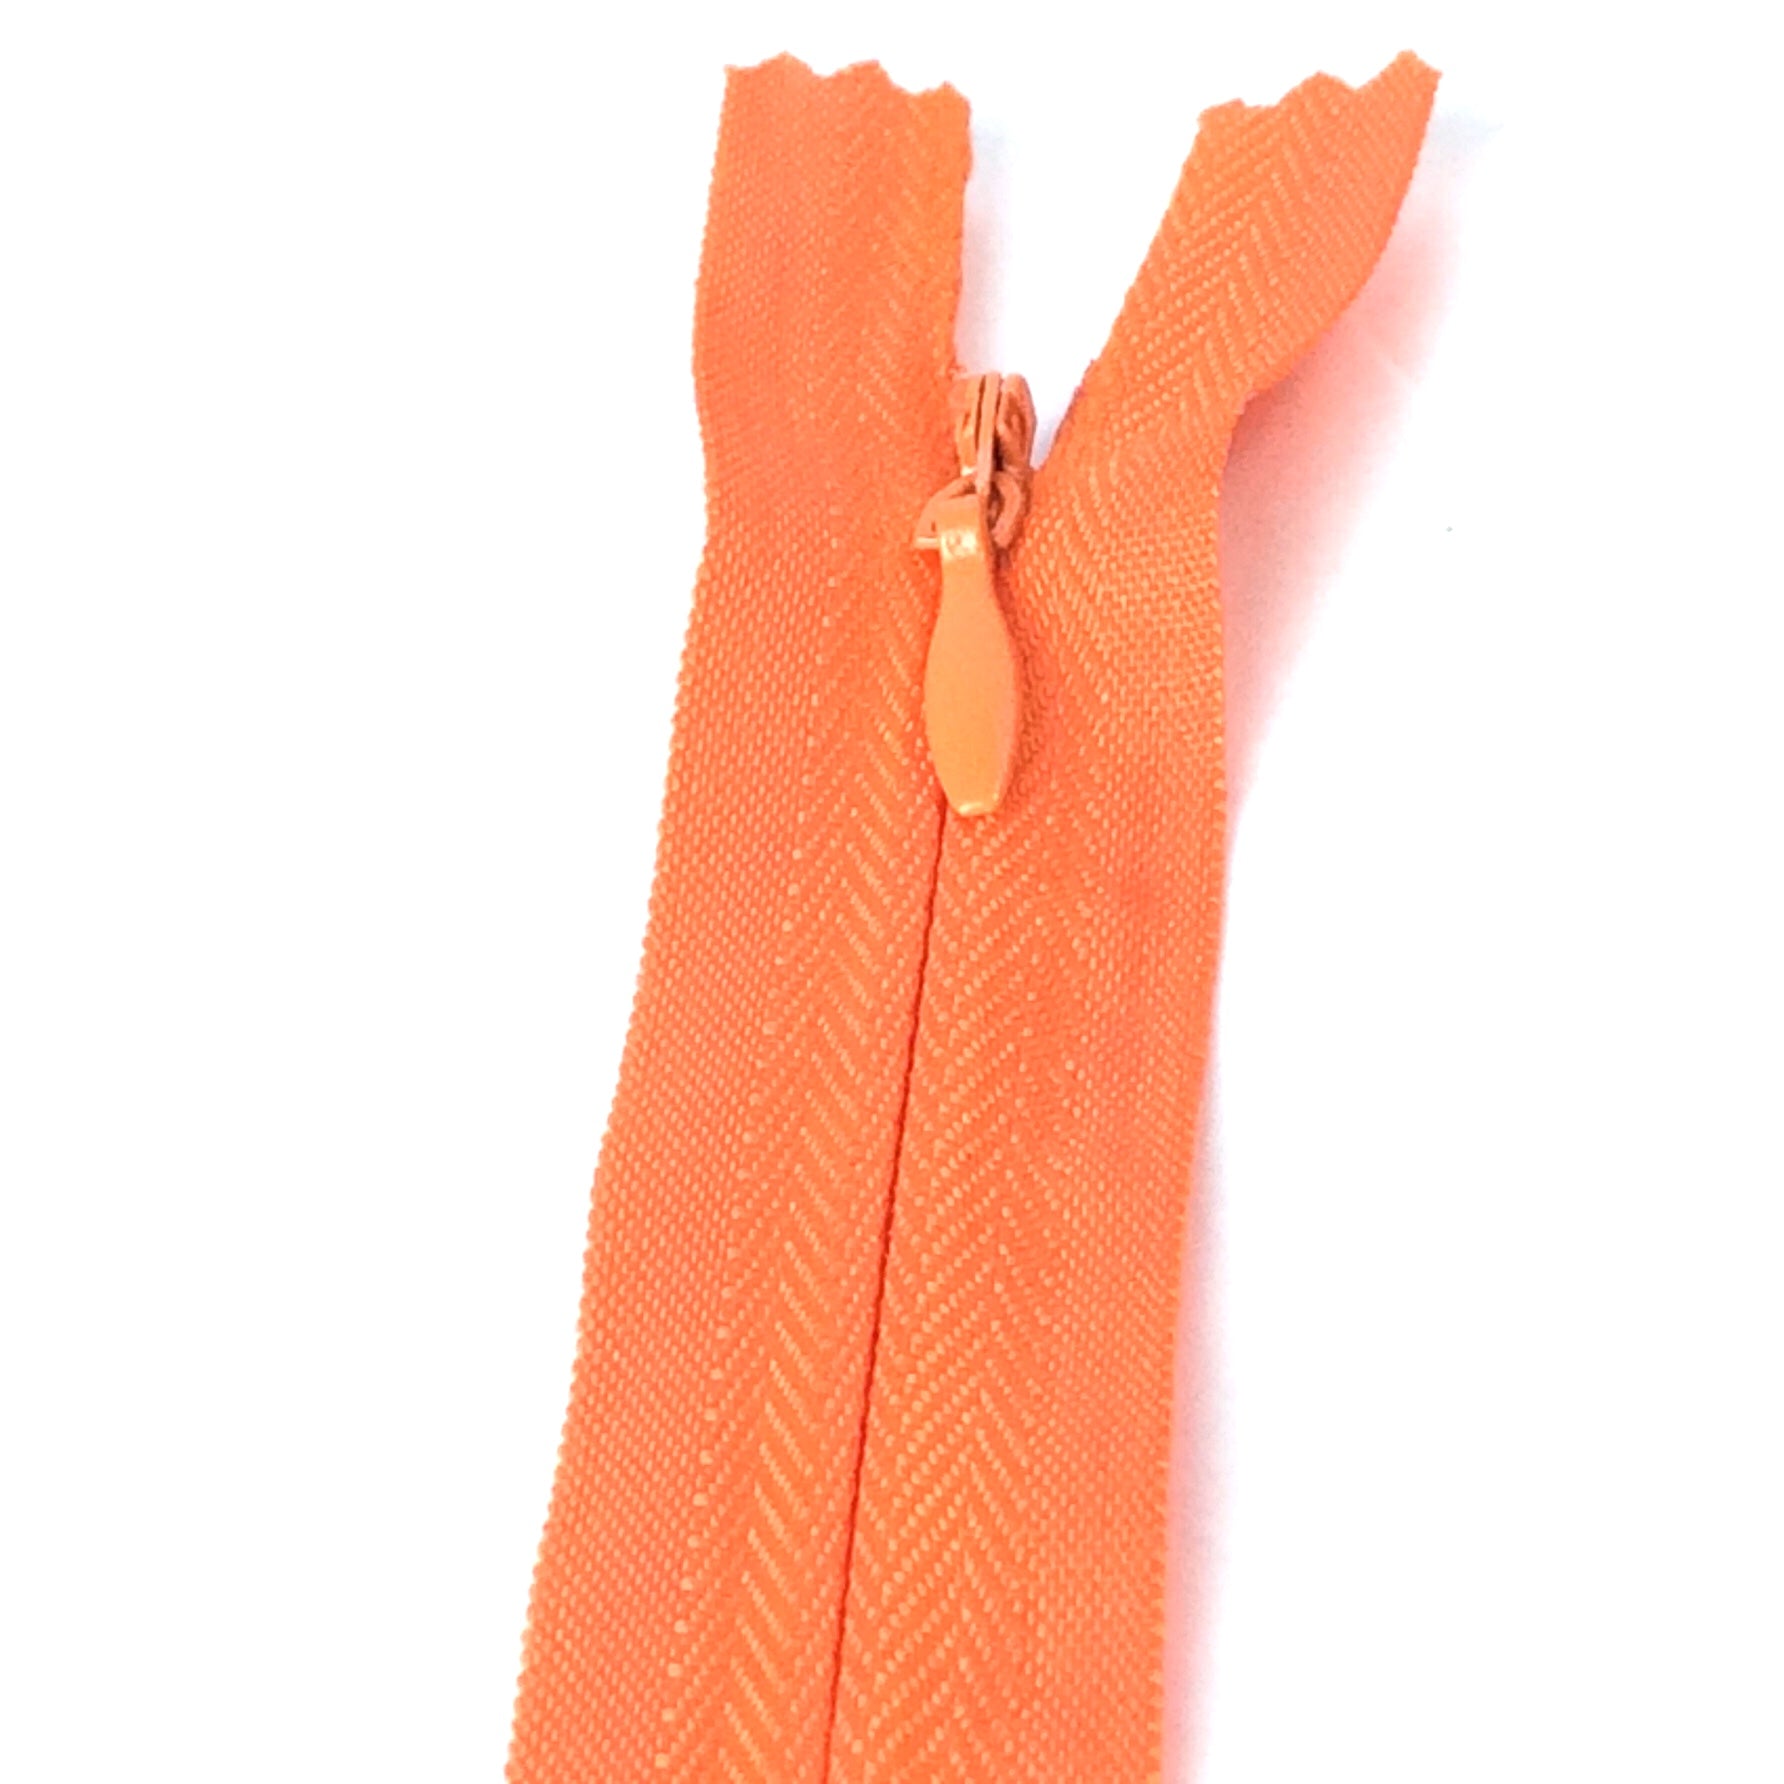 Invisible / Concealed Zippers  - Orange